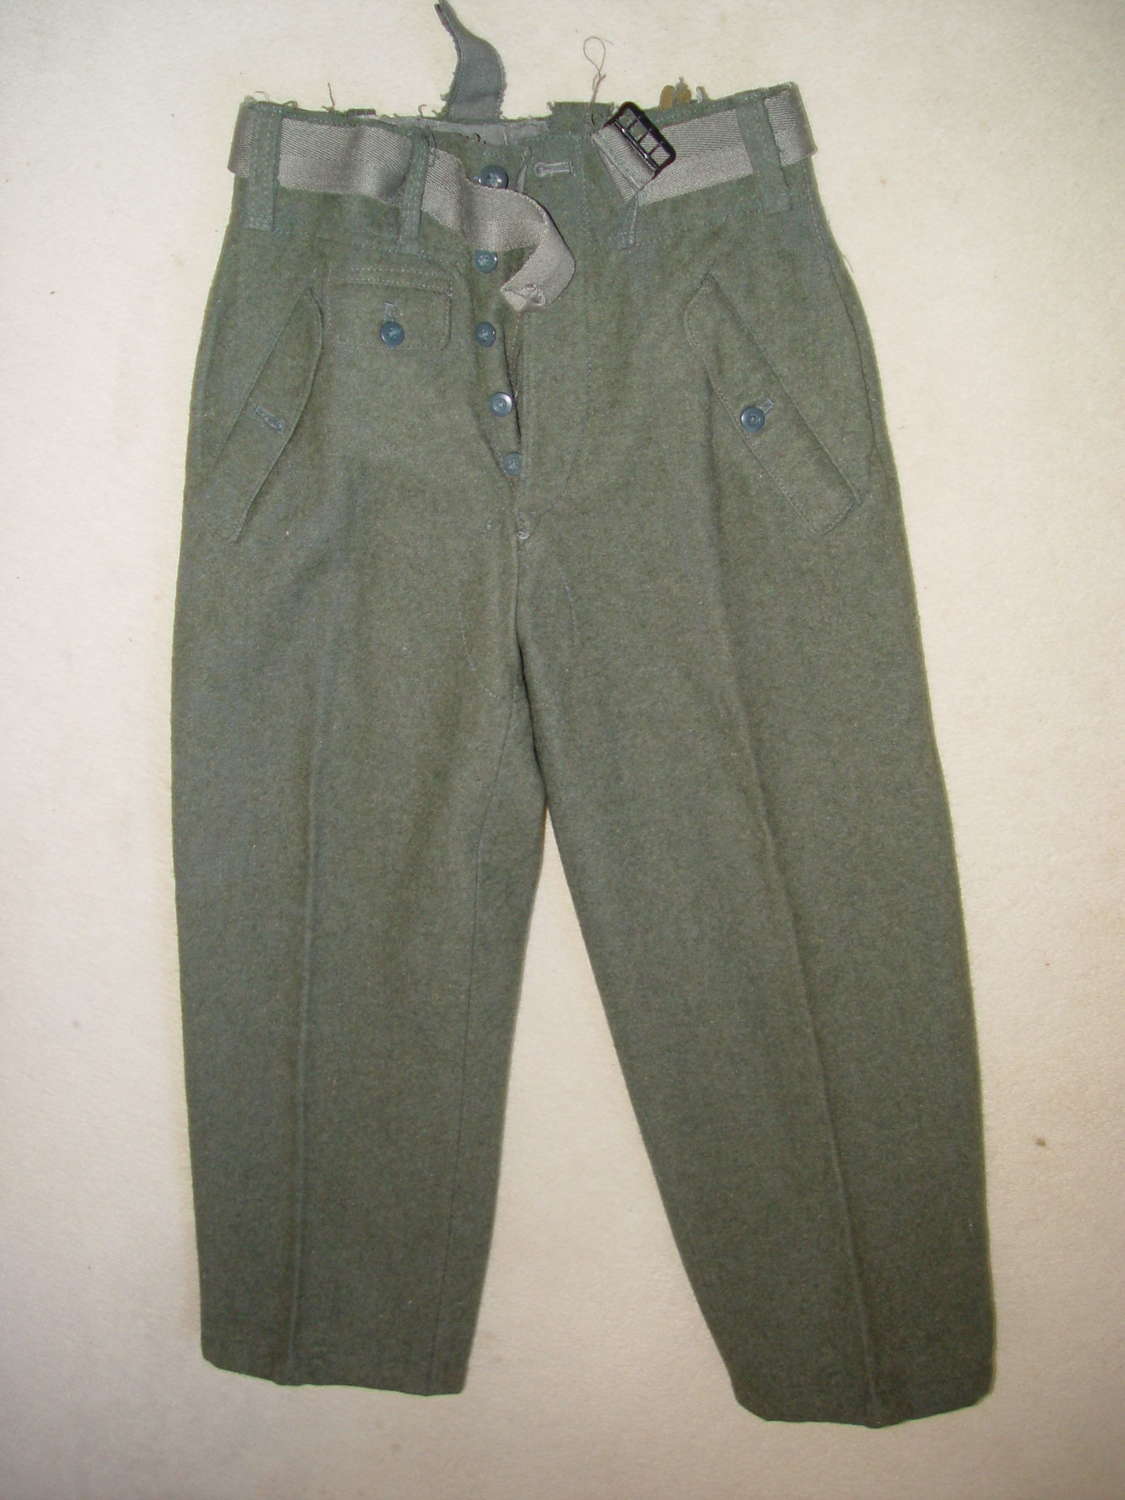 Rare Wehrmacht / SS M44 trousers